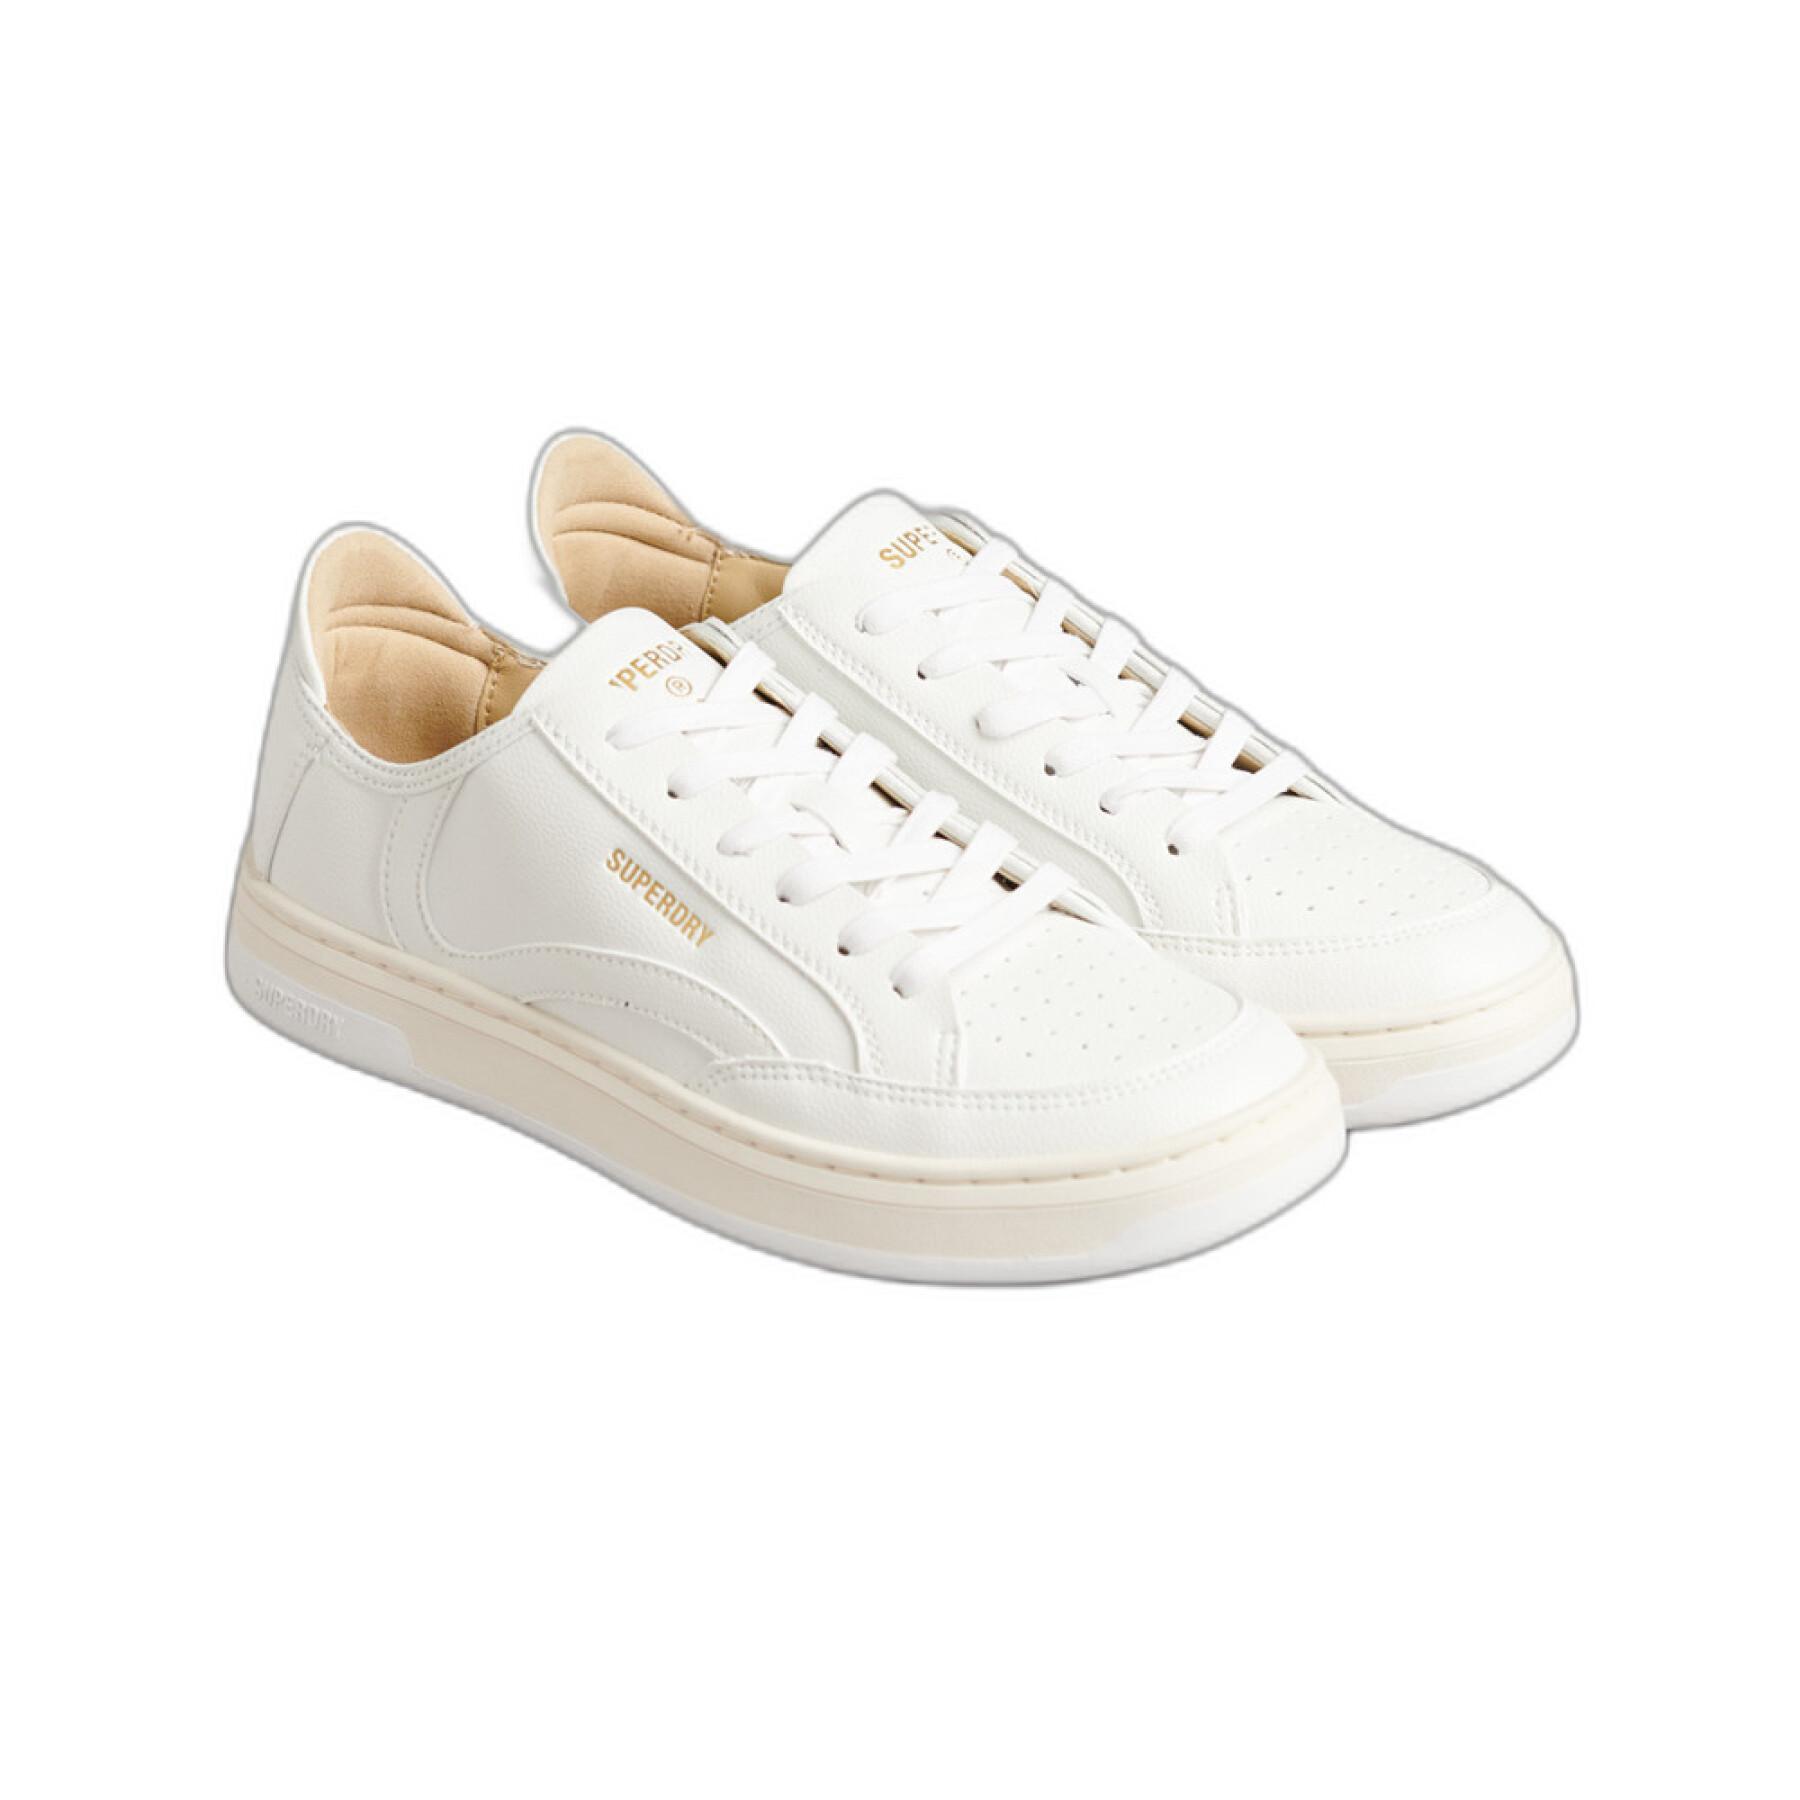 Formadoras de mulheres Superdry Lux Low Trainers